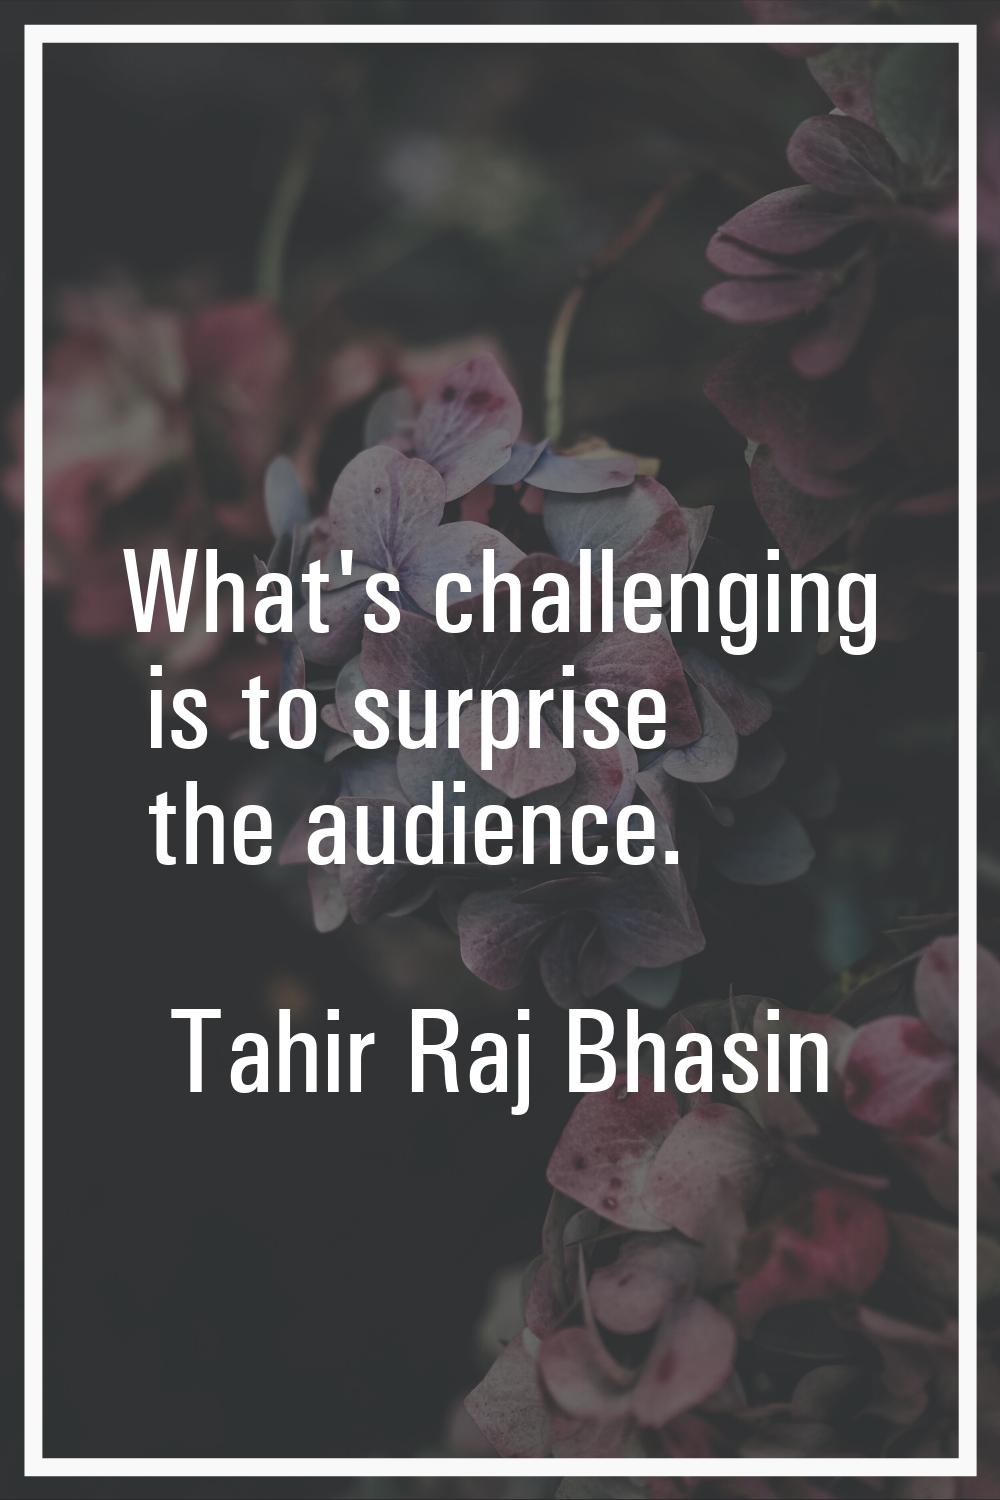 What's challenging is to surprise the audience.